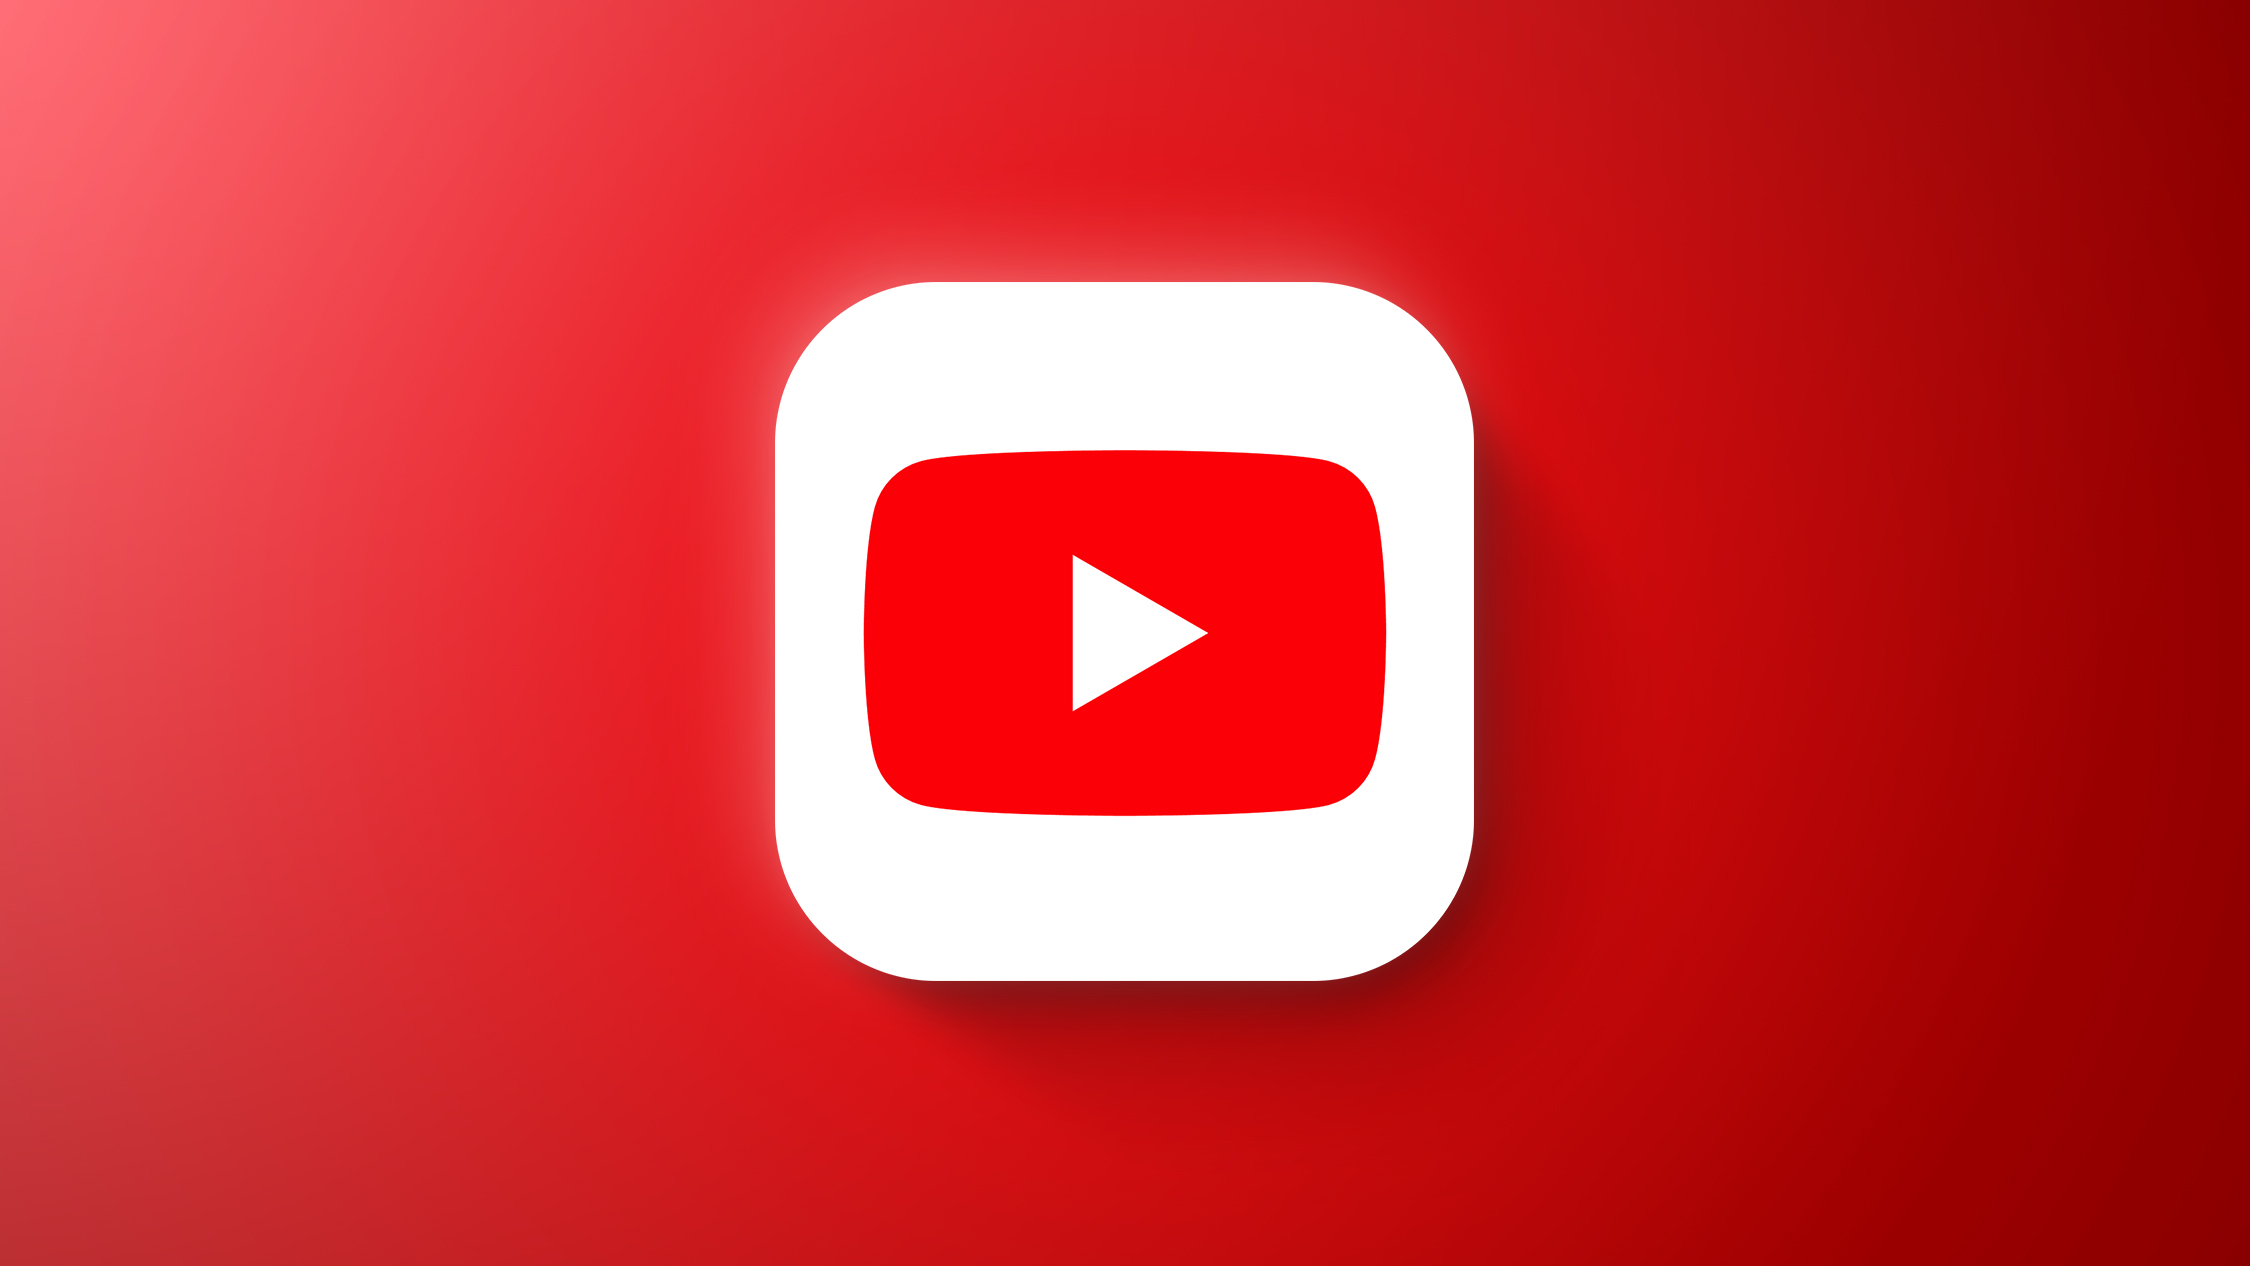 YouTube Ends Limited Test That Locked 4K Video Behind Premium Paywall